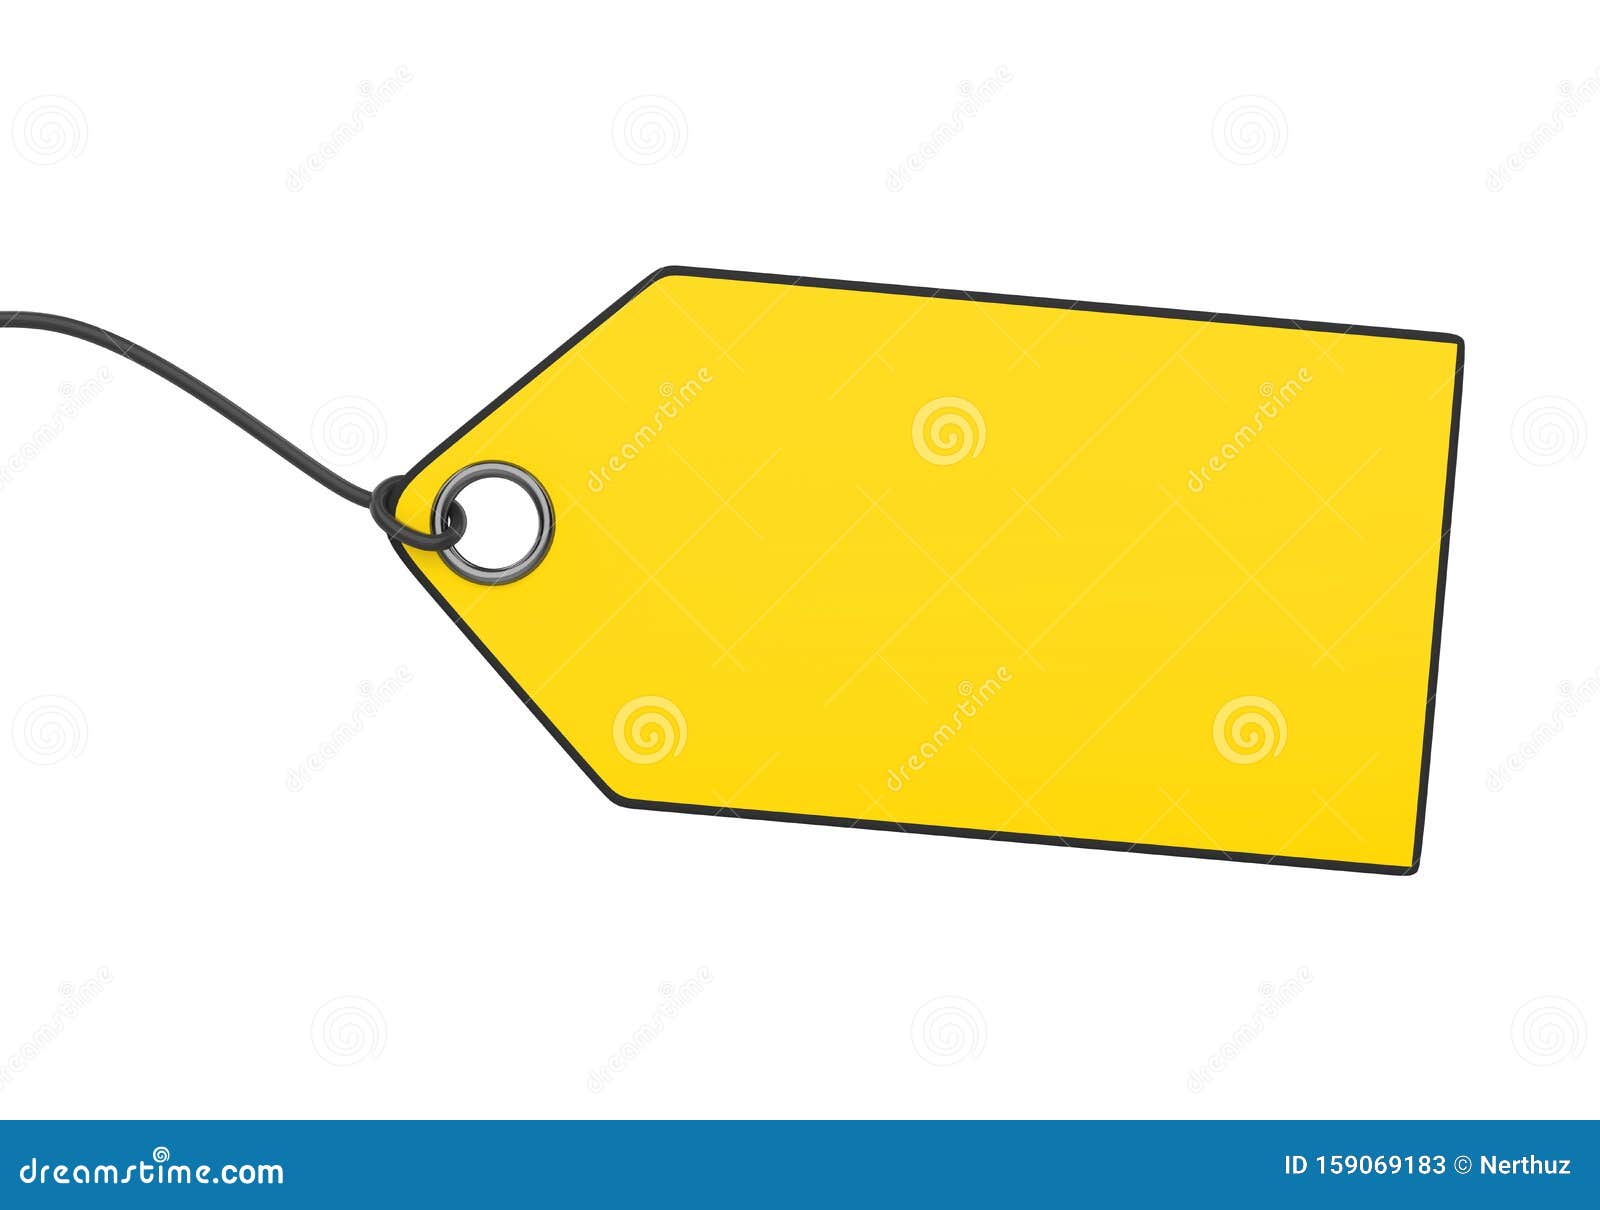 Blank Price Tag Isolated stock illustration. Illustration of offer -  159069183